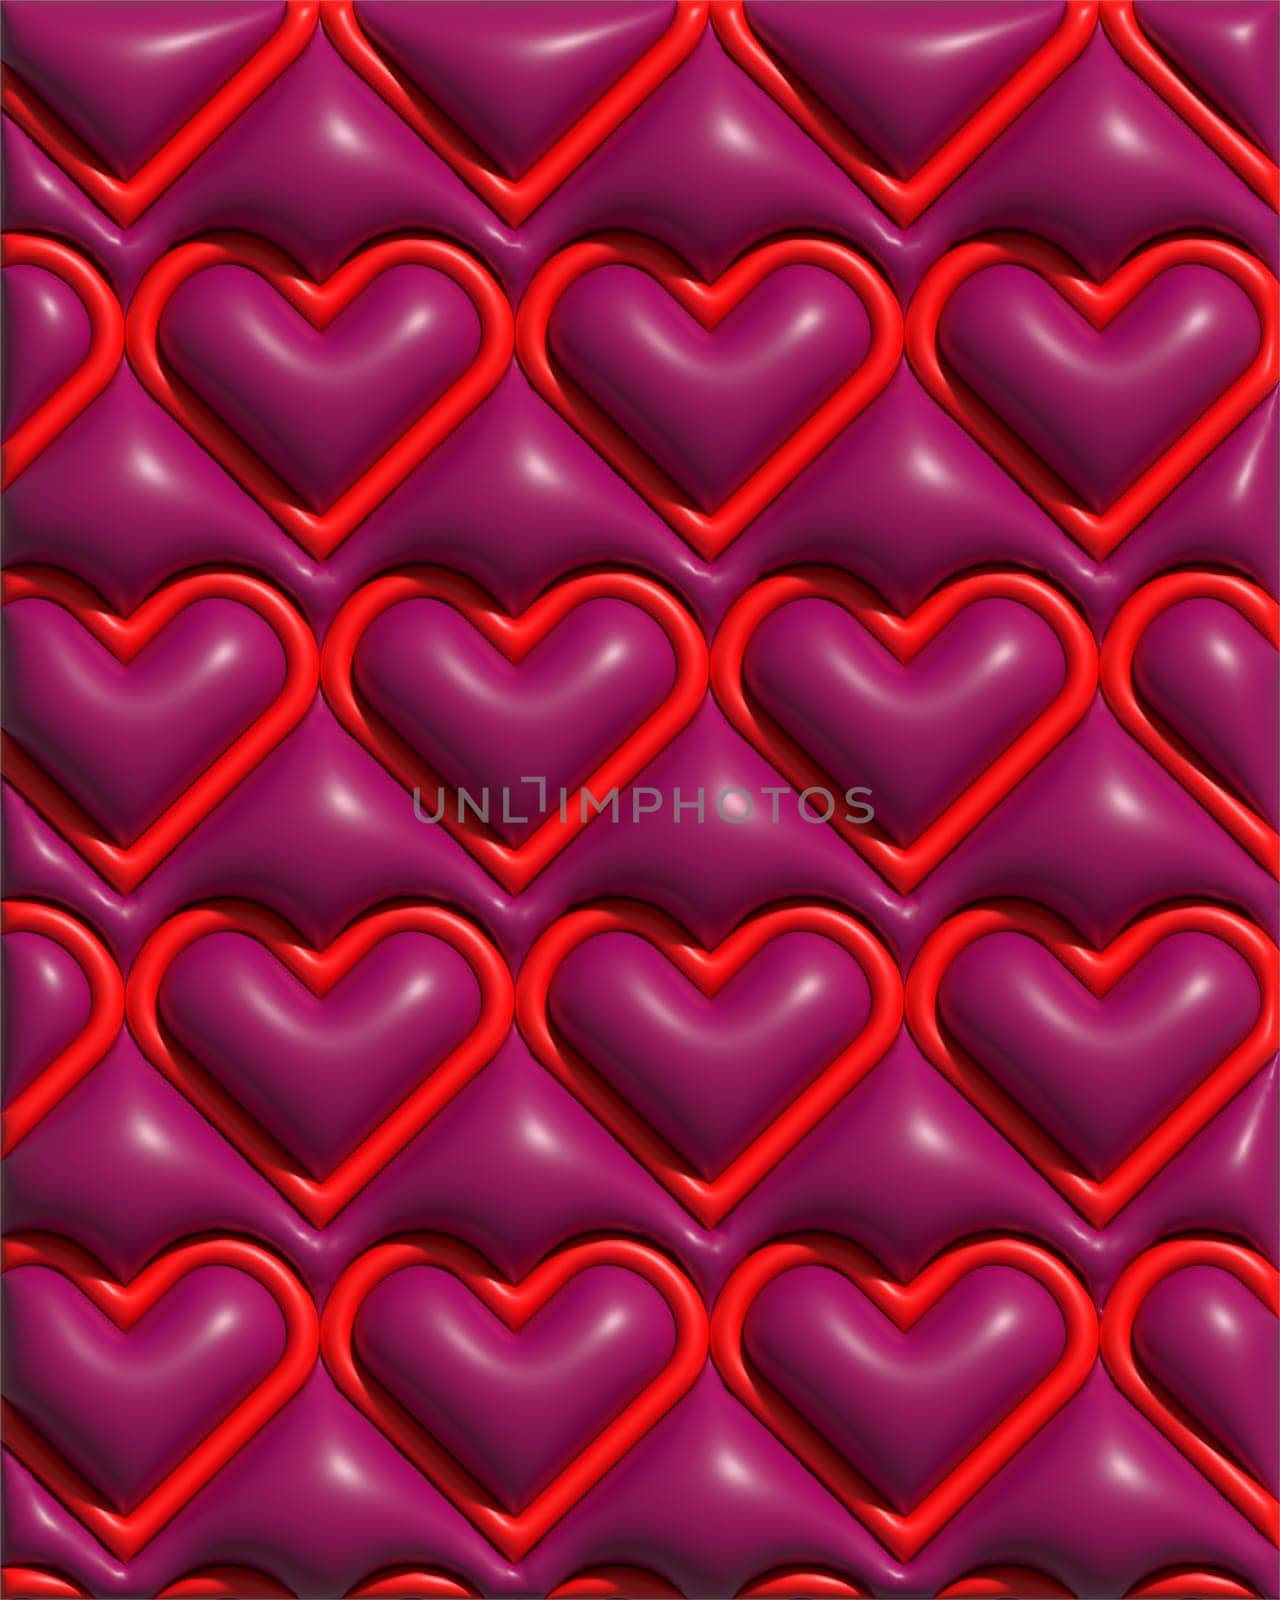 Red inflated hearts, 3D rendering illustration, pattern